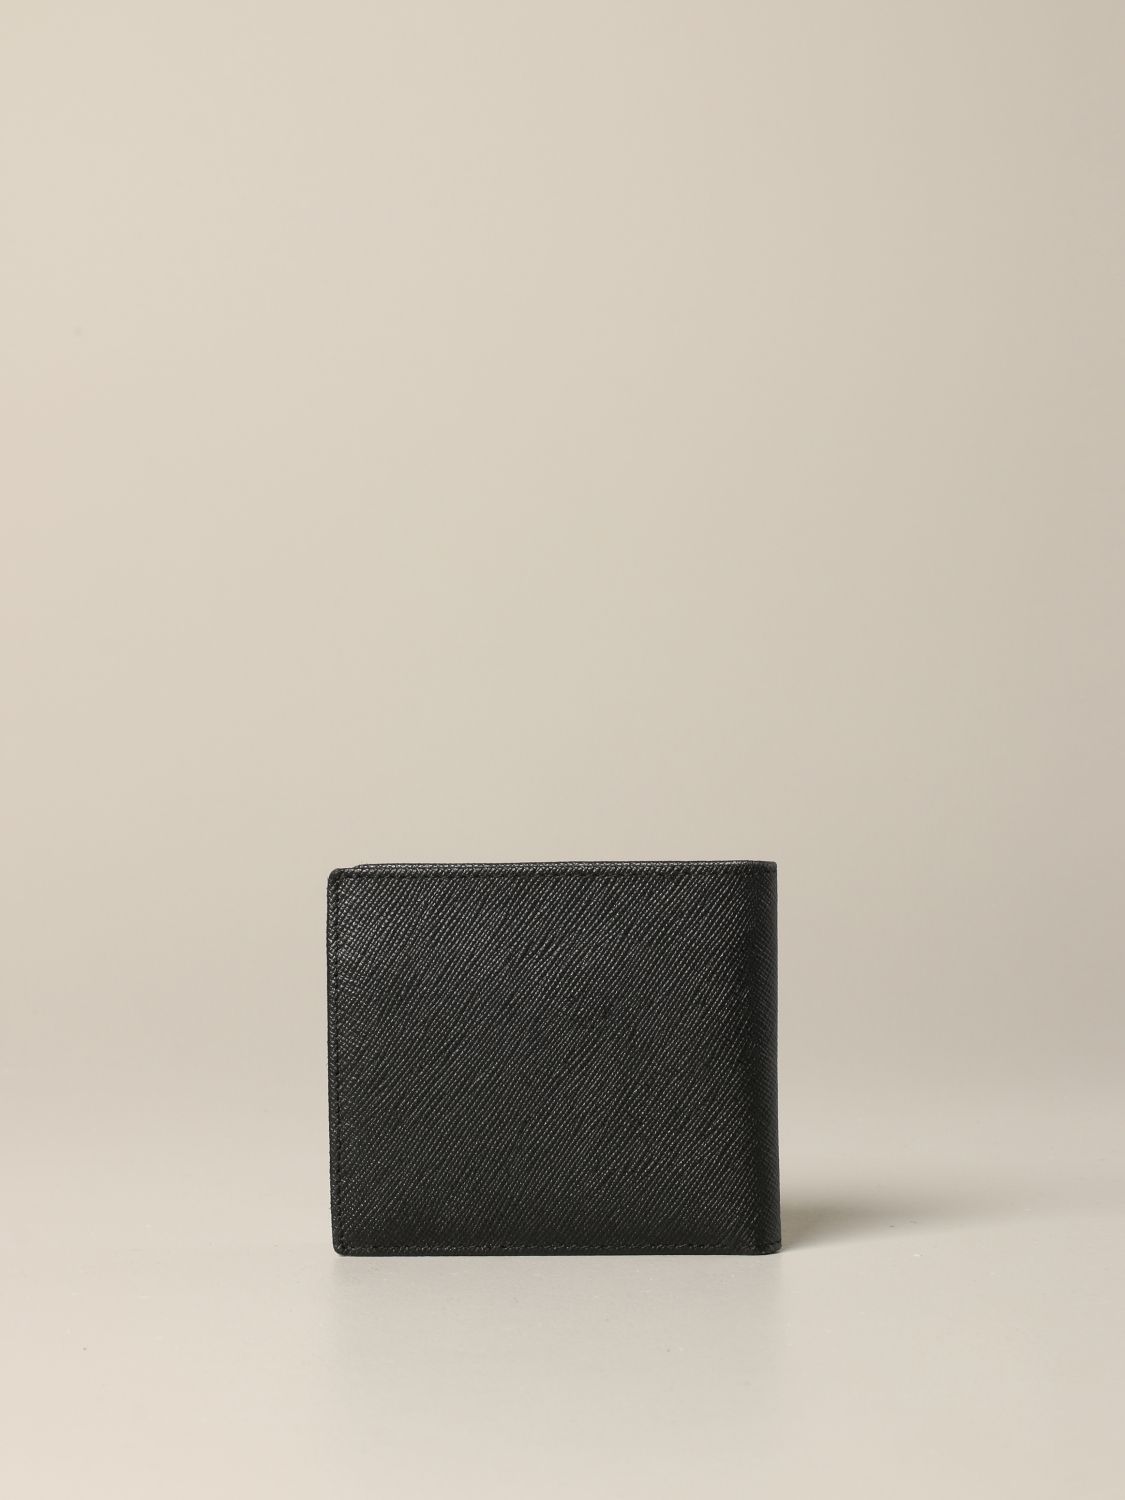 Armani Exchange Outlet: wallet in saffiano synthetic leather - Black | Armani  Exchange wallet 958098 CC223 online on 